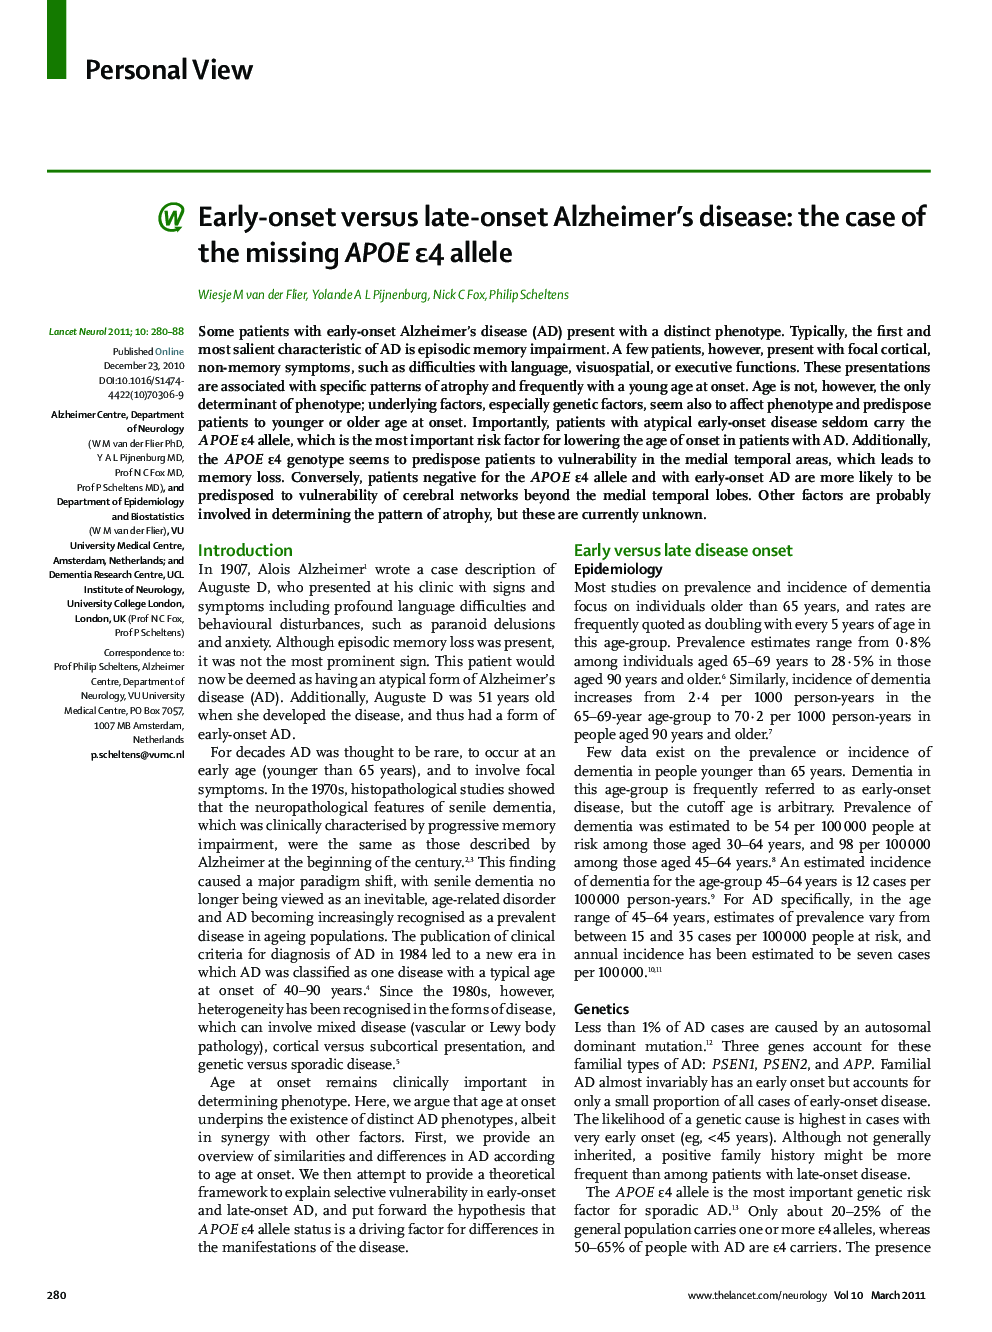 Early-onset versus late-onset Alzheimer's disease: the case of the missing APOE ɛ4 allele